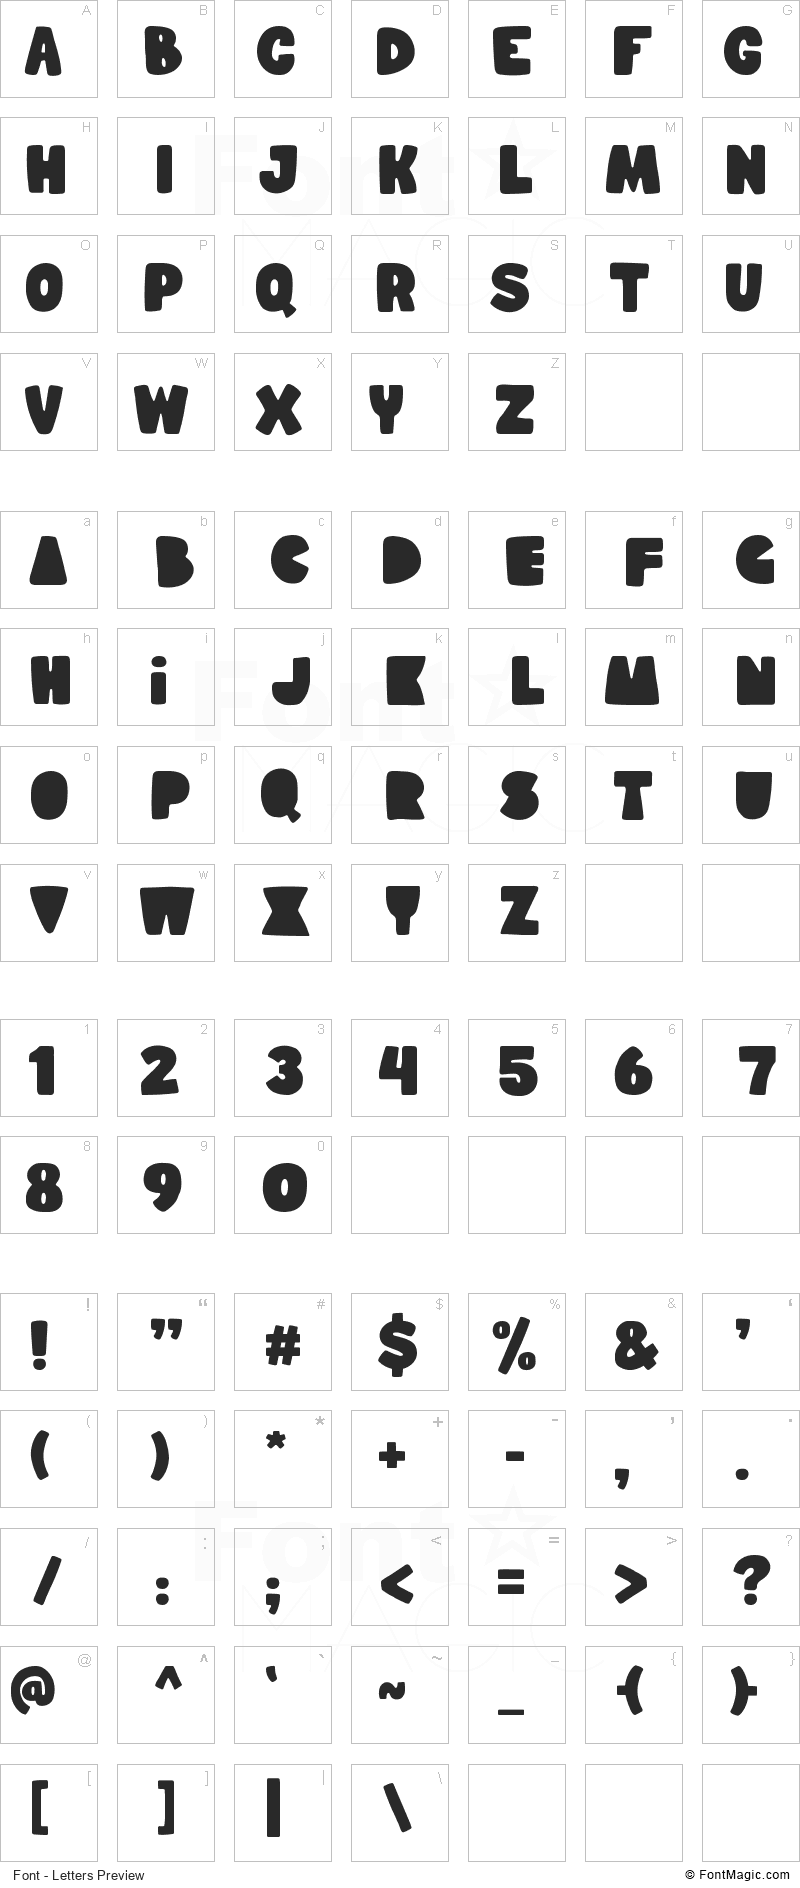 Child Dream Font - All Latters Preview Chart